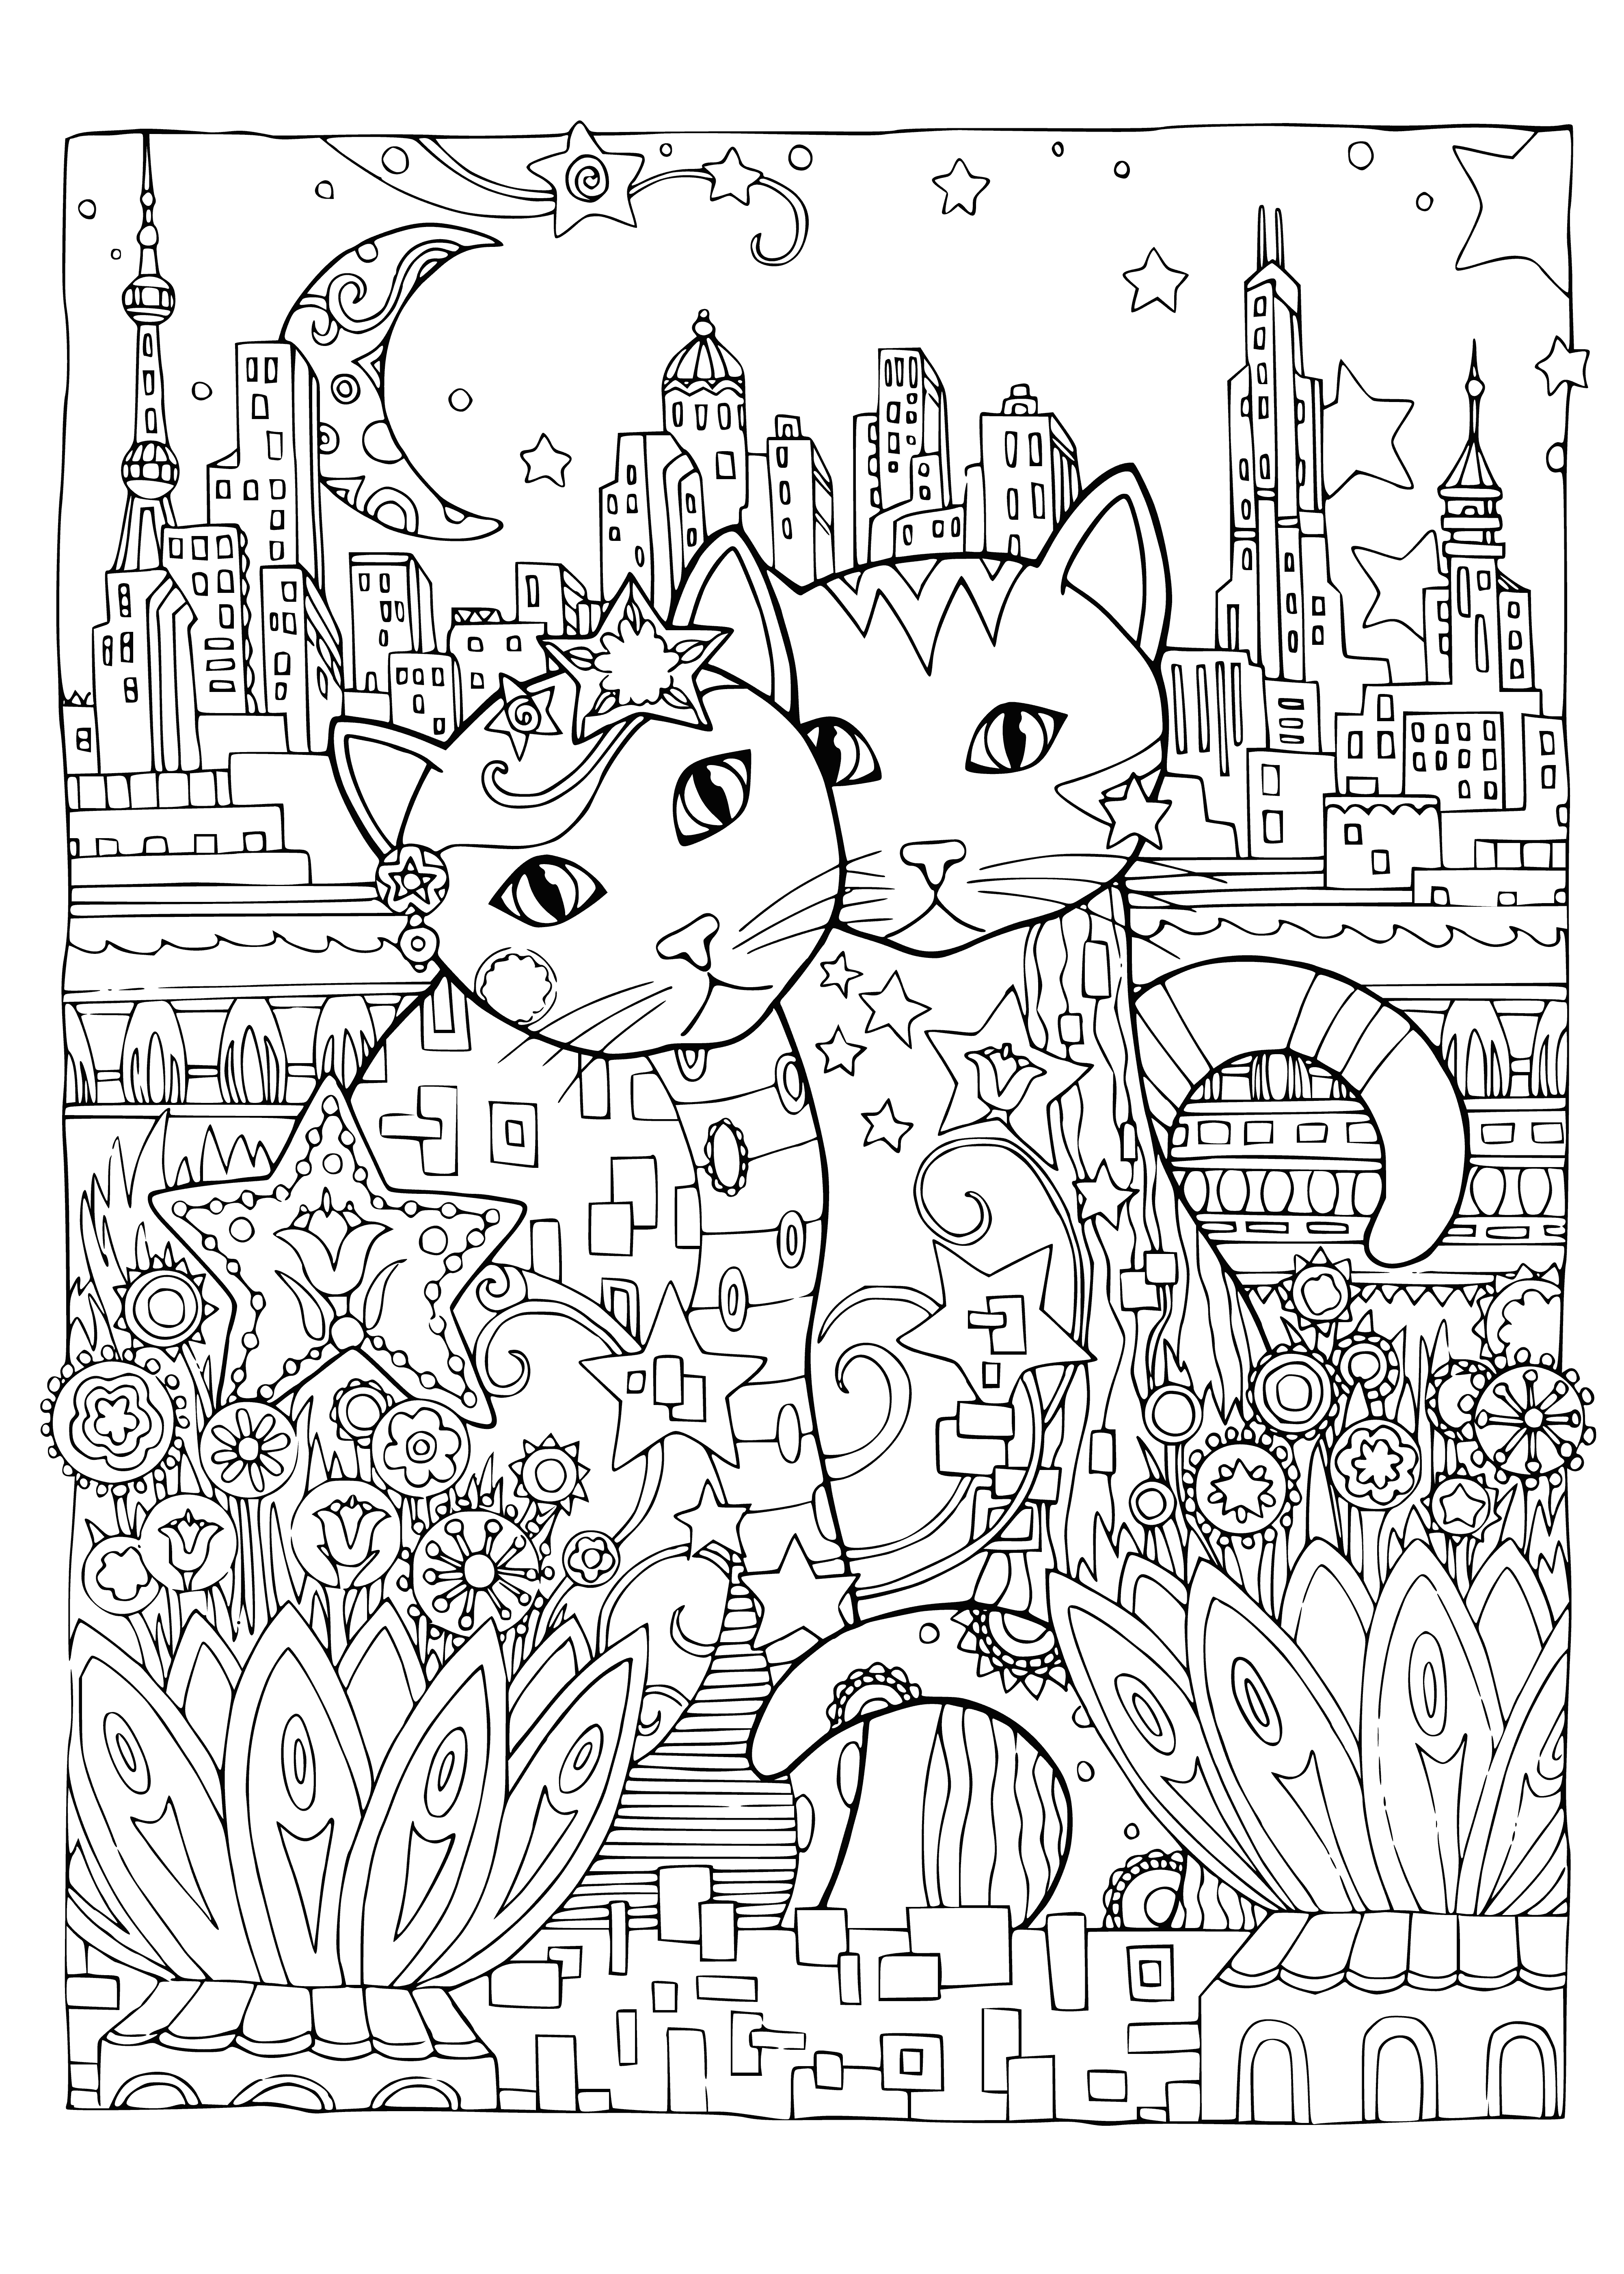 Cats in the city coloring page